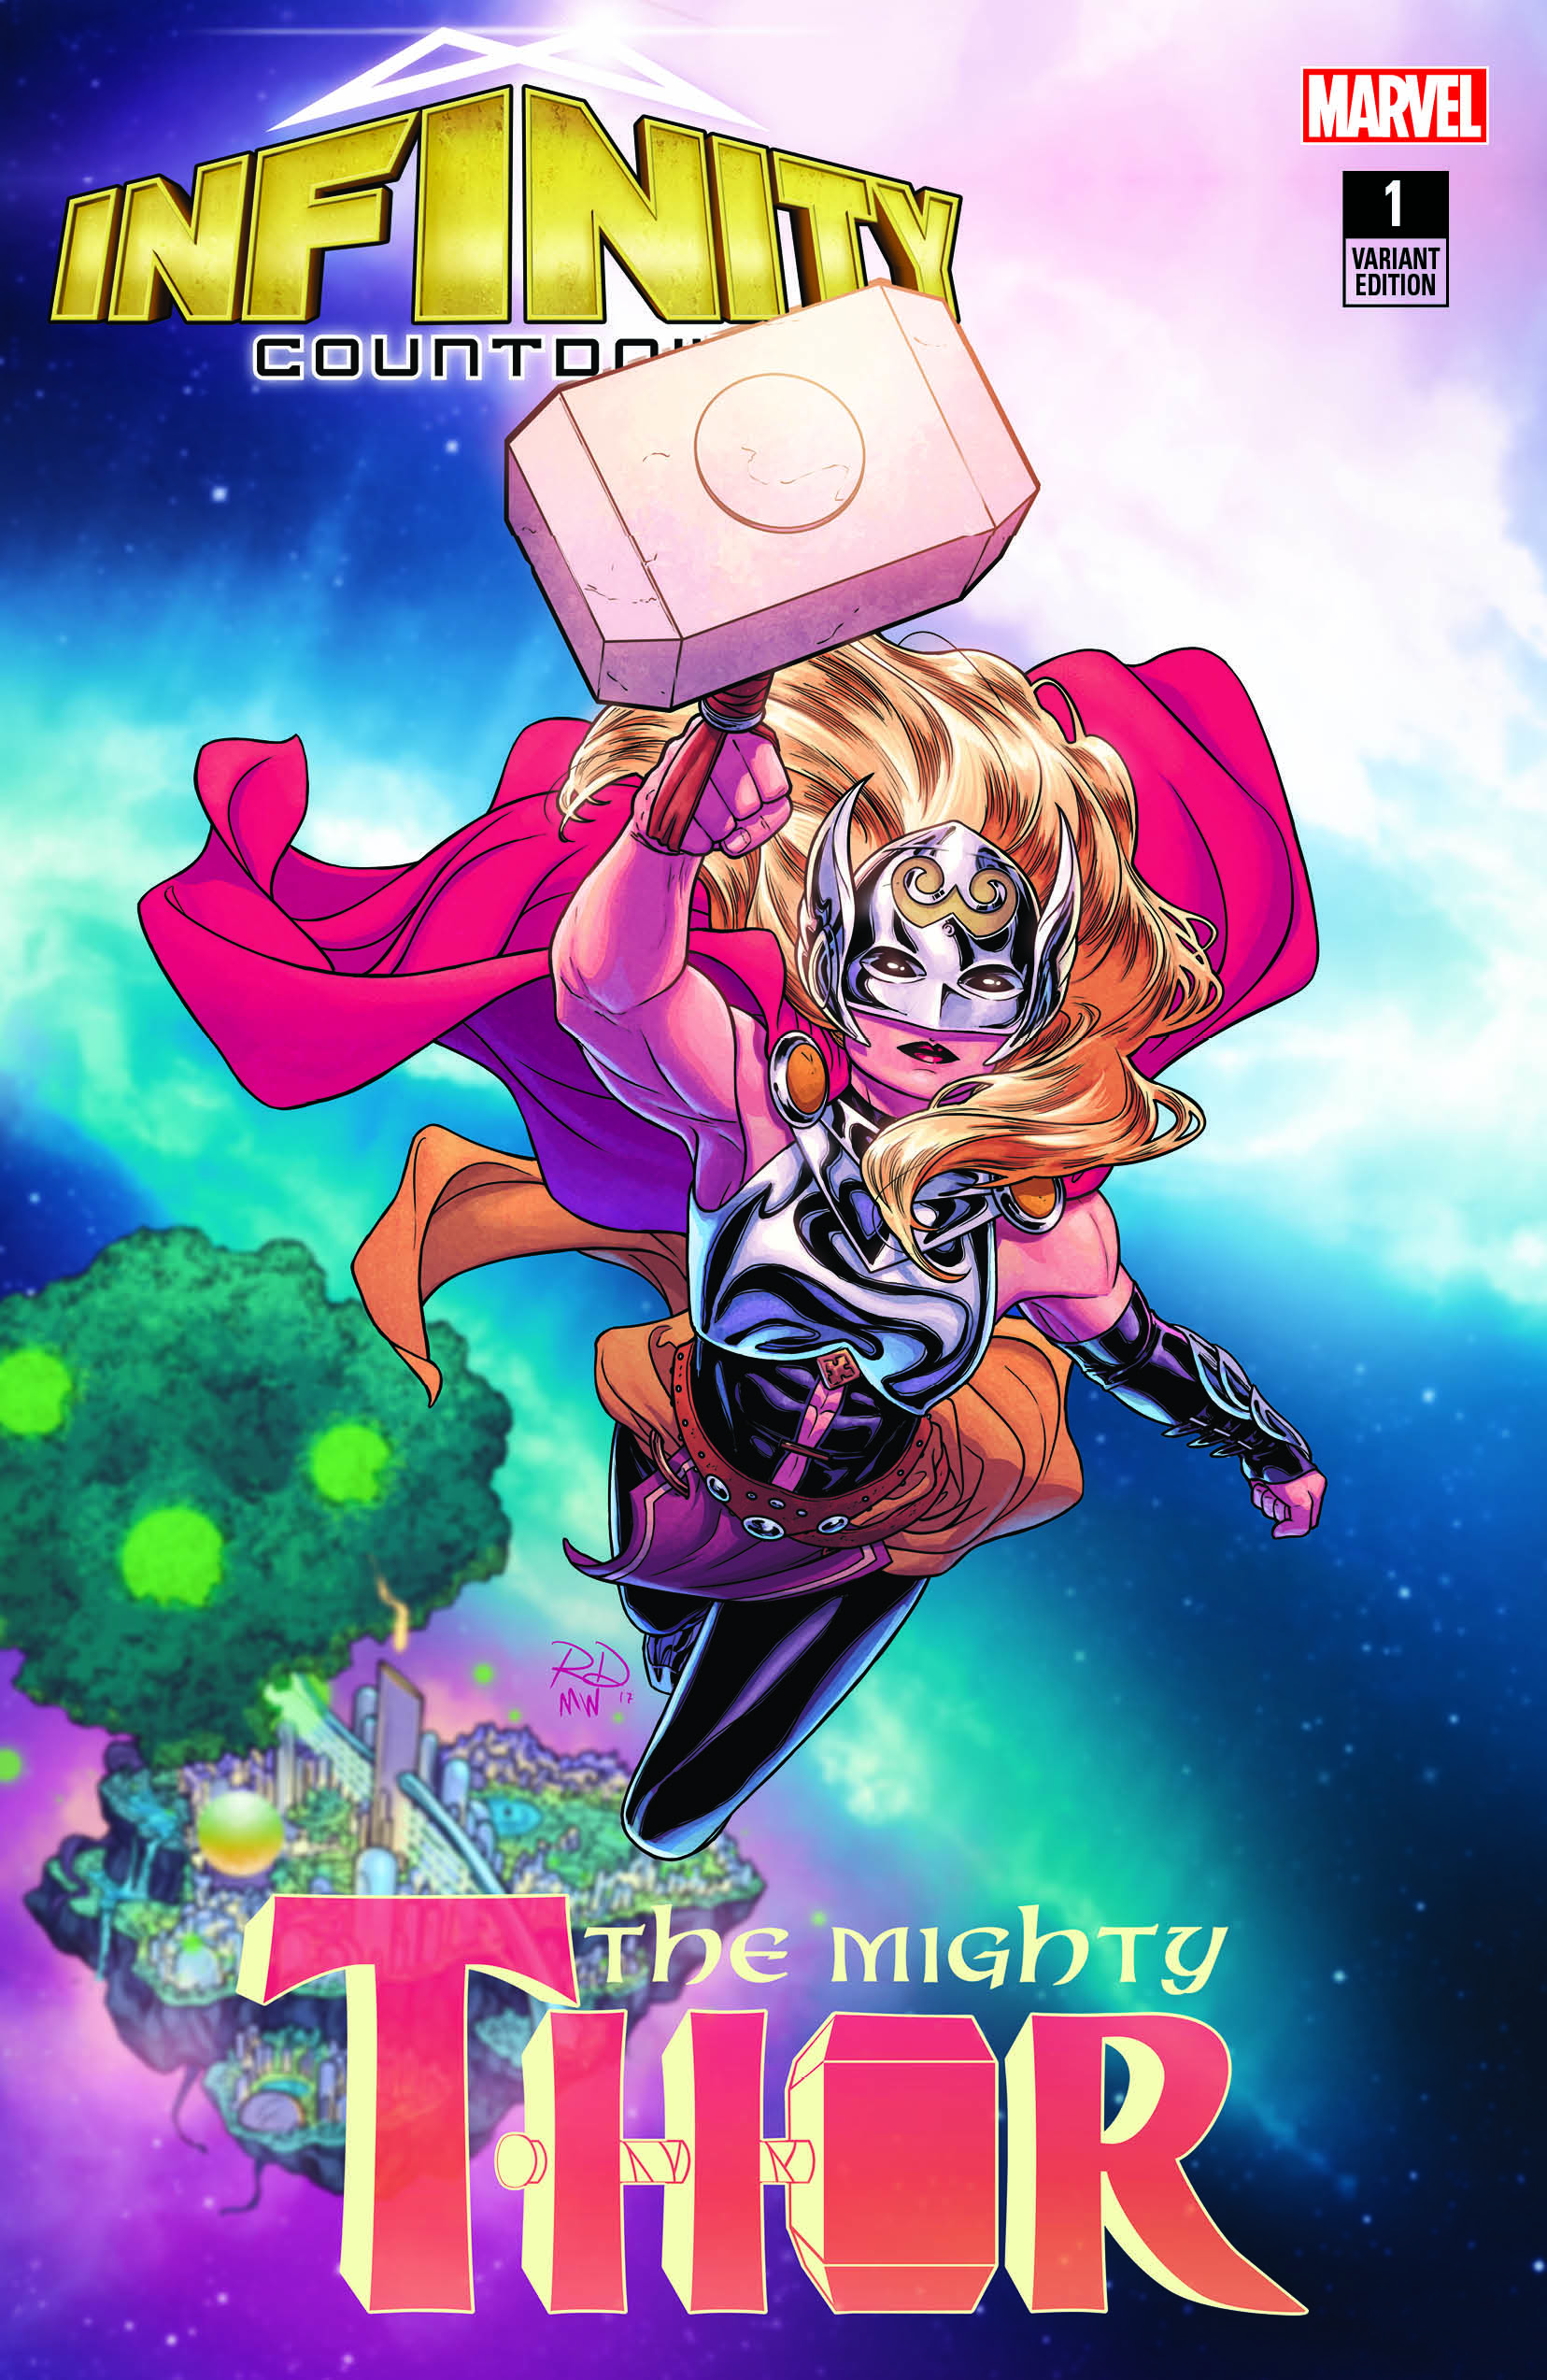 Never enough Thor covers proven true by Marvel's new variants on sale soon